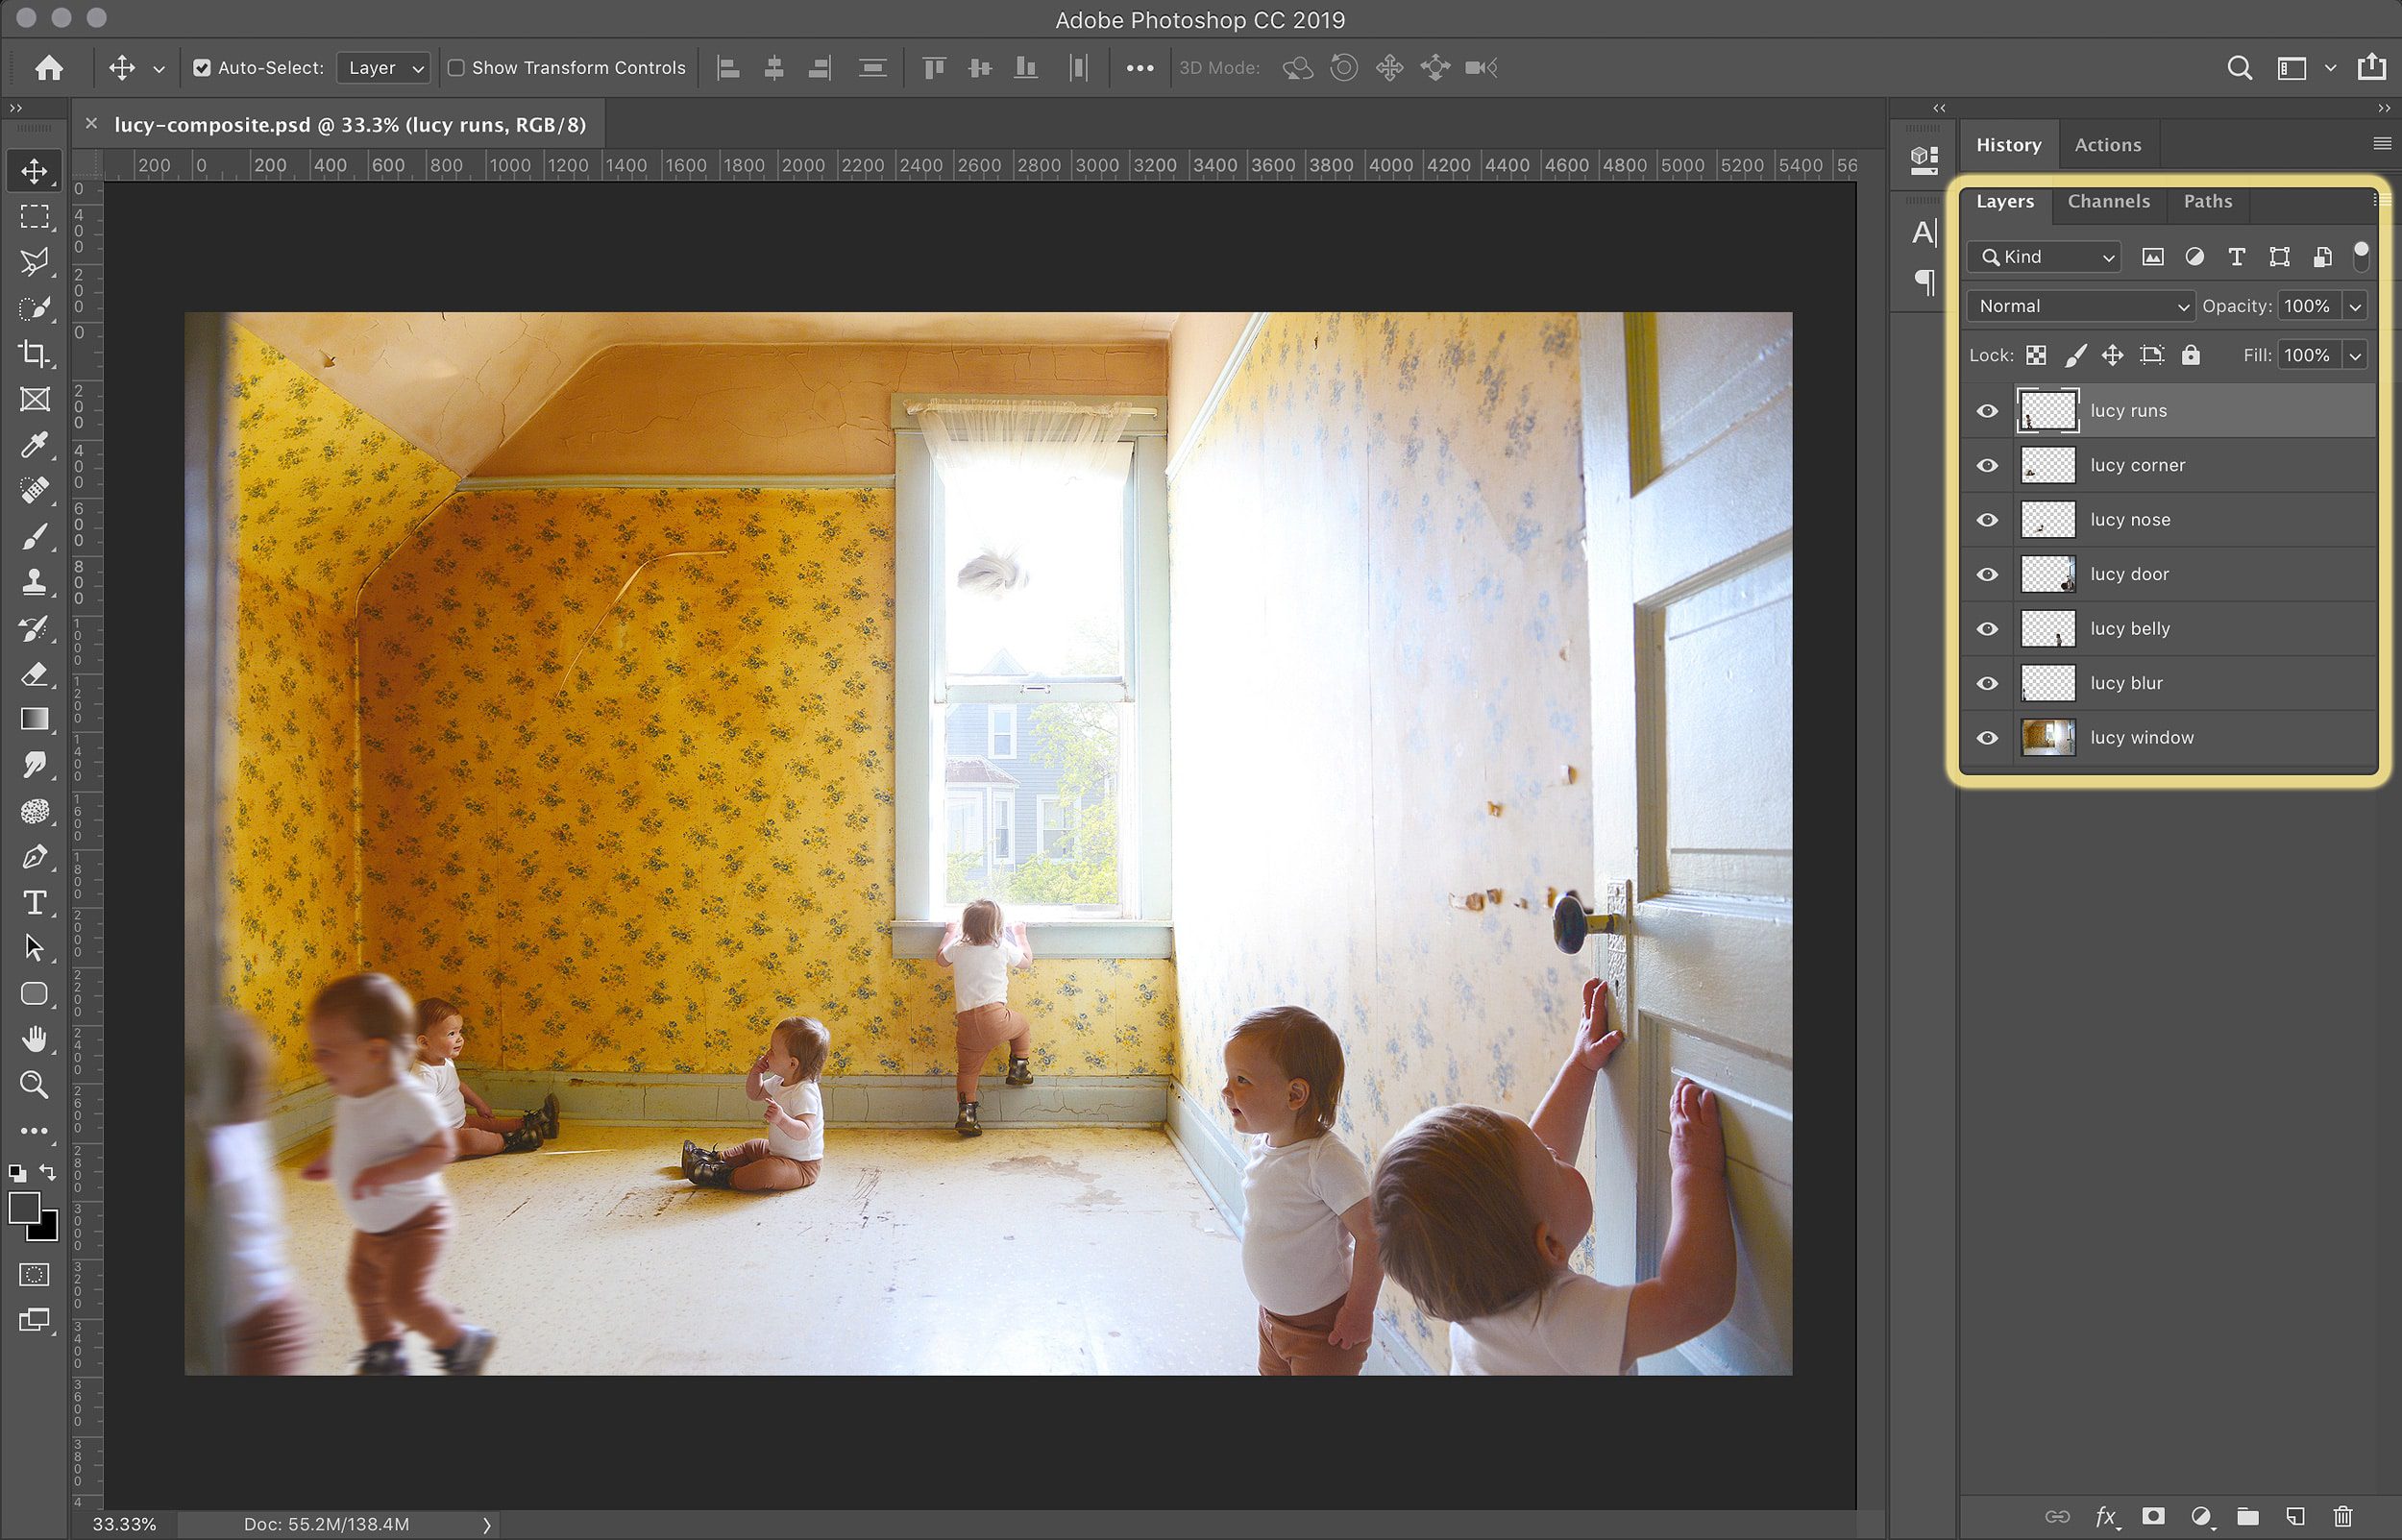 How To Create a Composite Photo by Stitching Multiple Images Together // via Yellow Brick Home